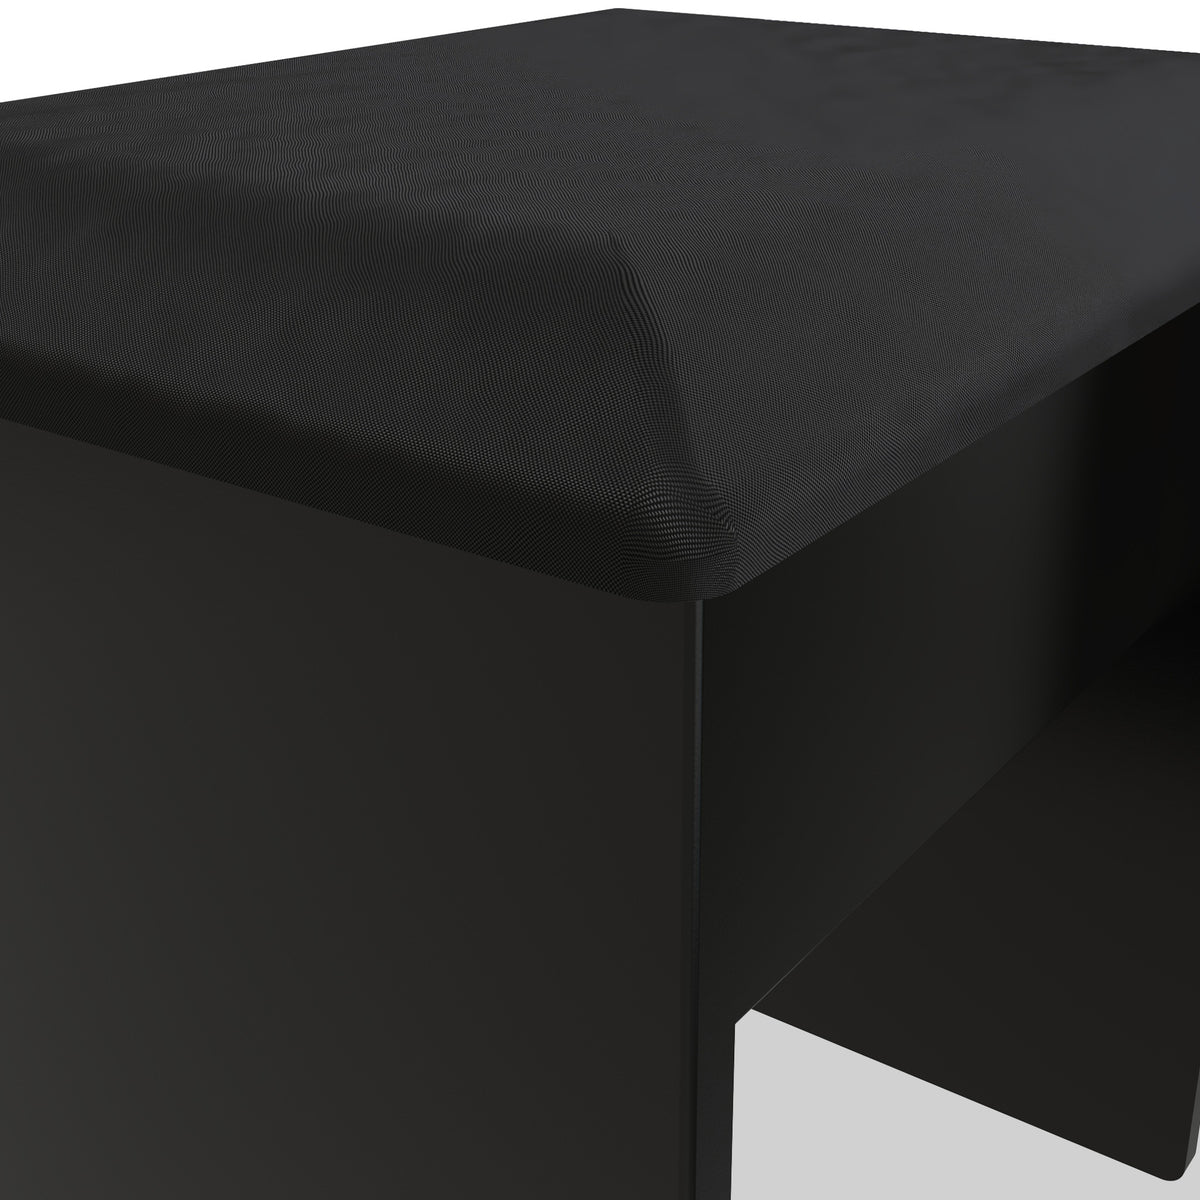 Beckett Black Gloss Dressing Table with Stool from Roseland